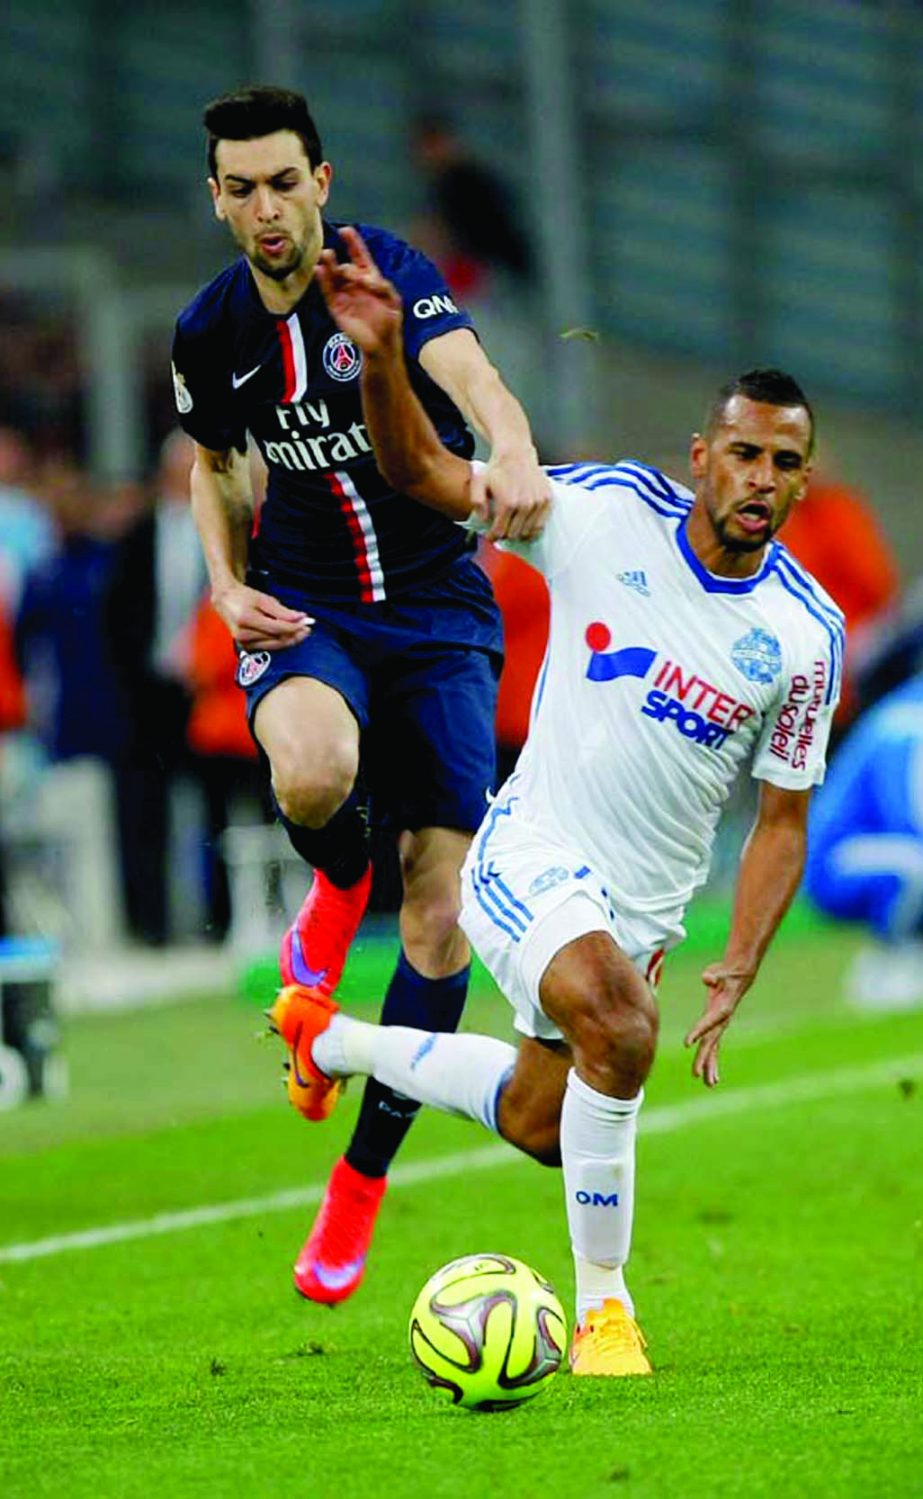 Marseille's Jacques-Alaixys Romao (right) challenges Paris Saint Germain's Argentinean midfielder Javier Pastore for the ball, during the League One soccer match between Marseille and Paris Saint-Germain at the Velodrome Stadium in Marseille, southern F